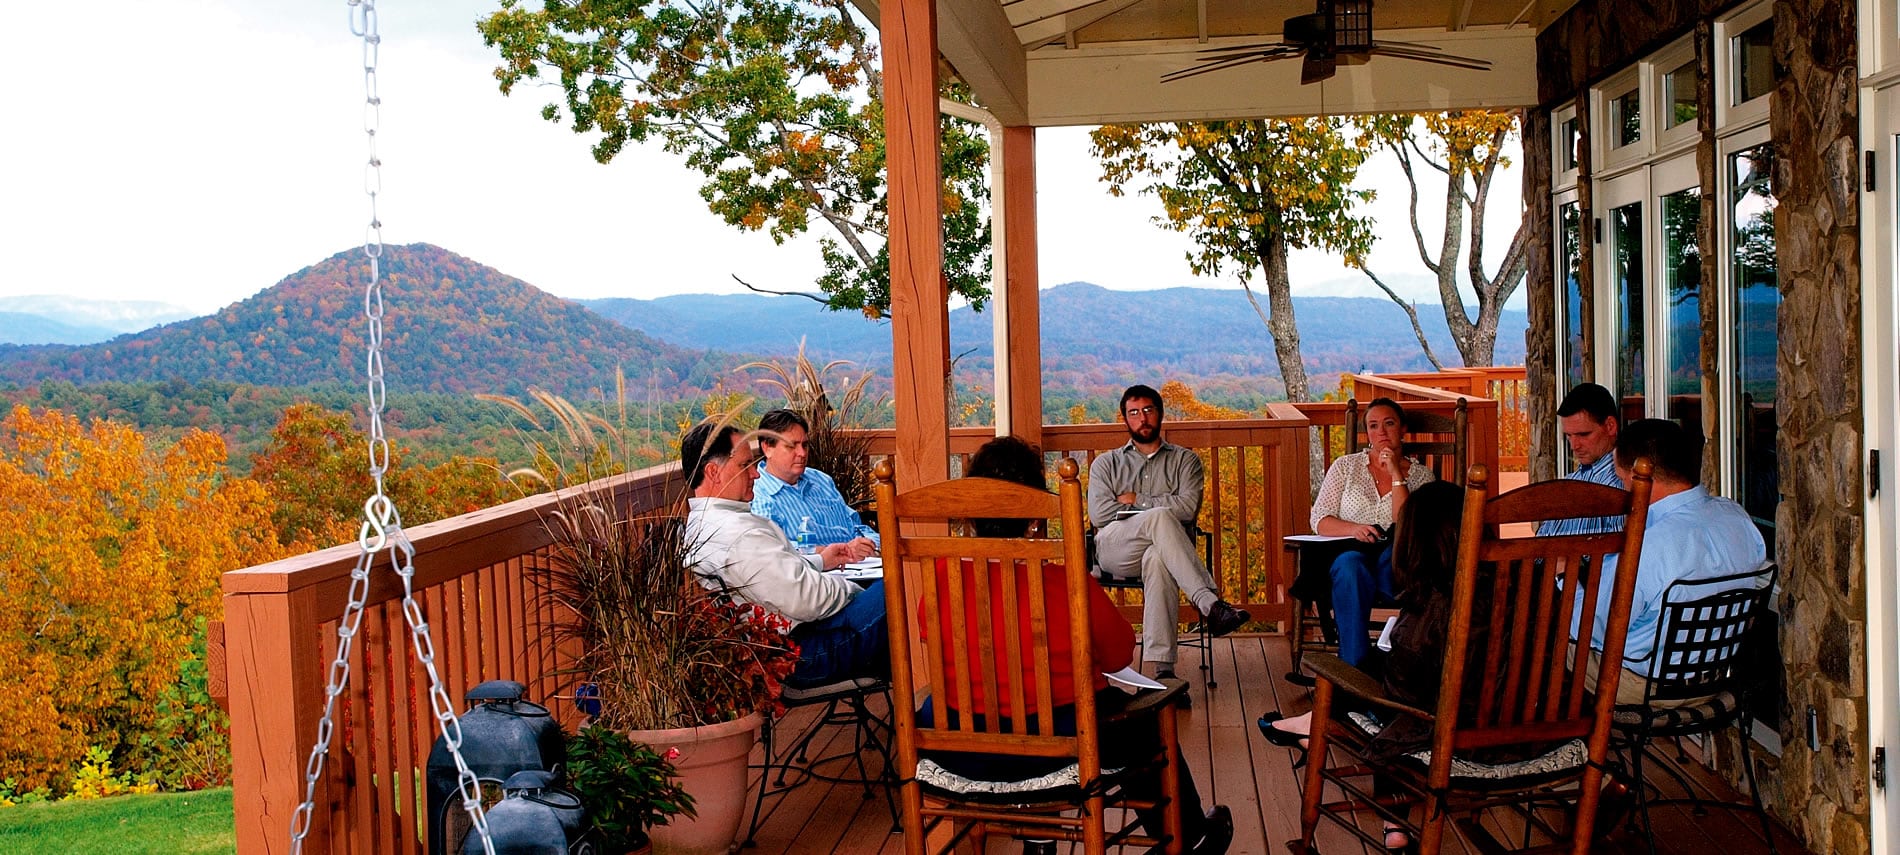 A group of 8 people sitting in chairs on the deck in a circle for a meeting